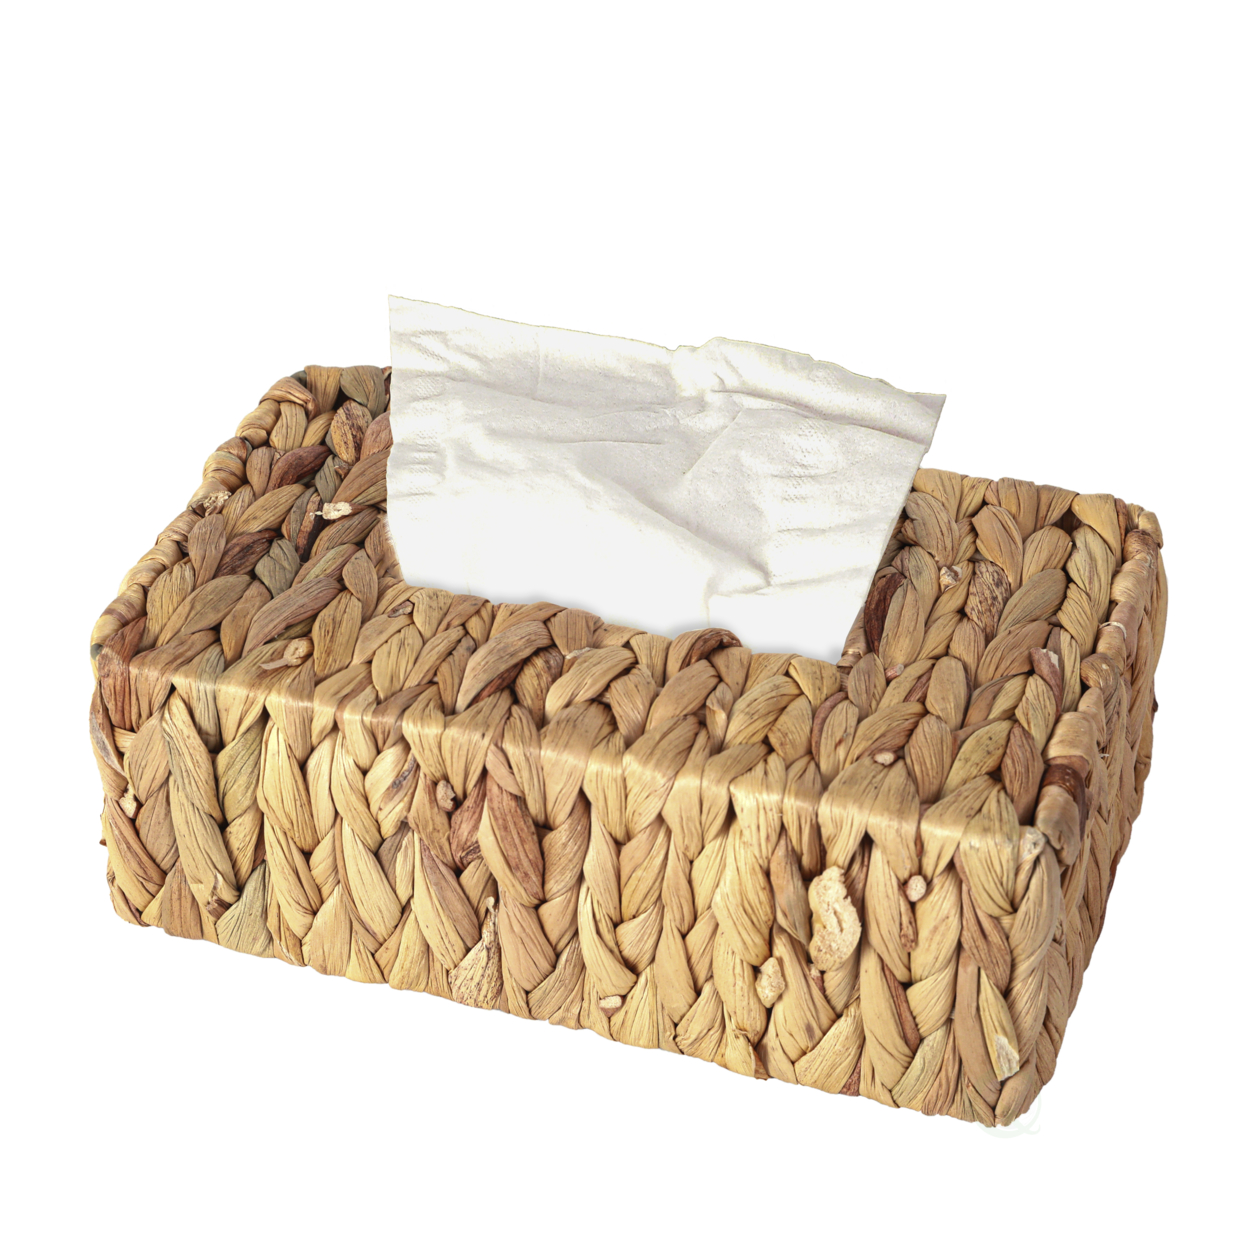 Water Hyacinth Wicker Rectangular Tissue Box Cover - Rectangle Tall, Size Of A Kleenex Tissue Box